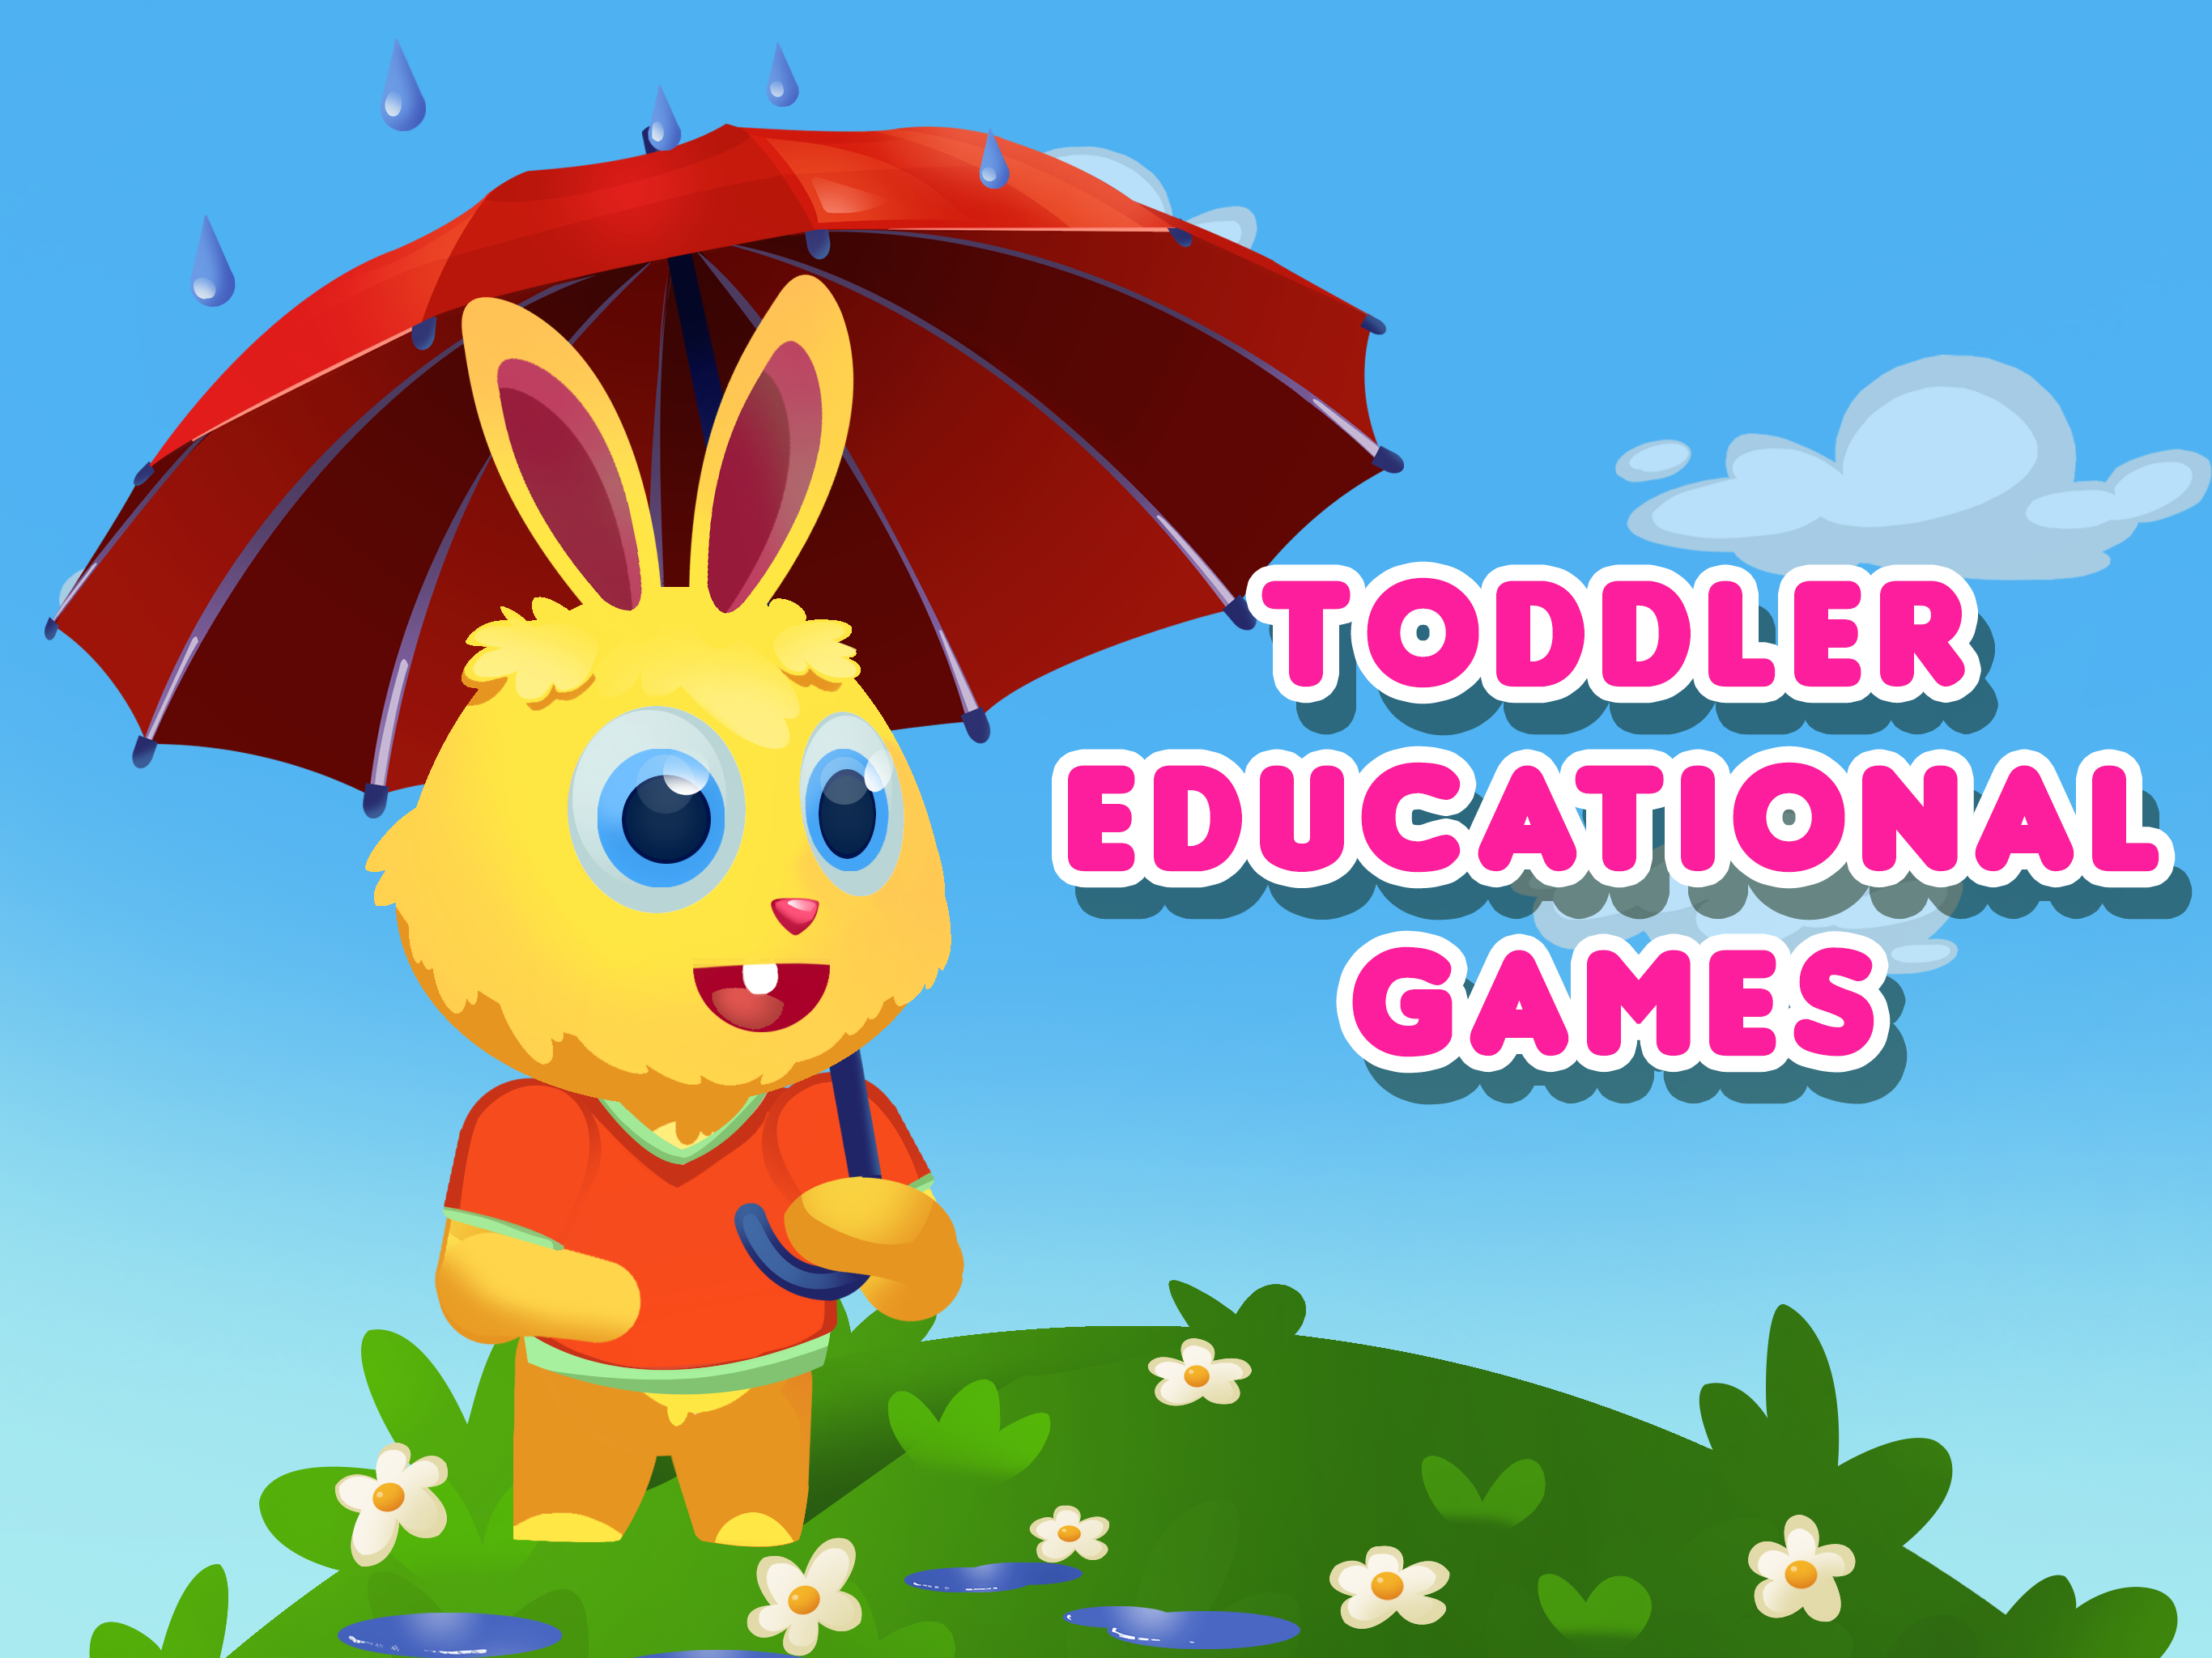 Toddler learning games for 3+